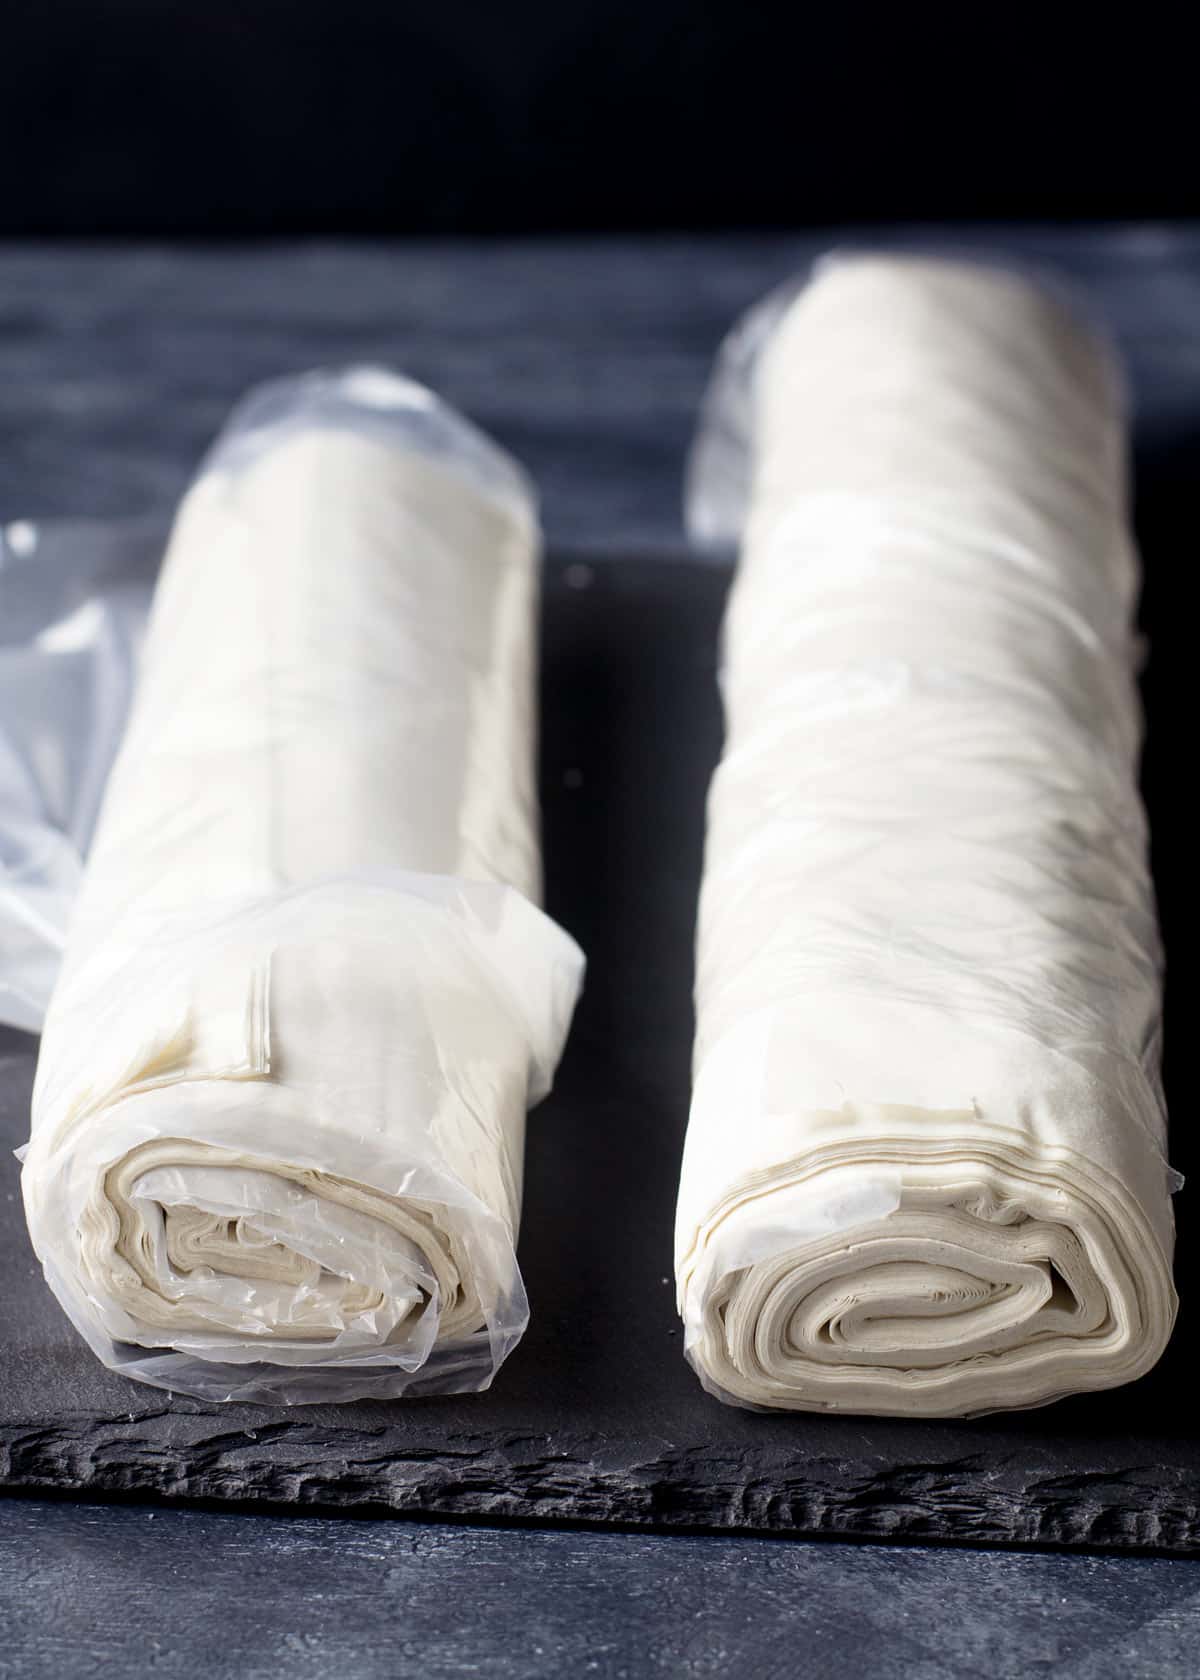 Two rolls of fresh fillo pastry sheets showing the layers.